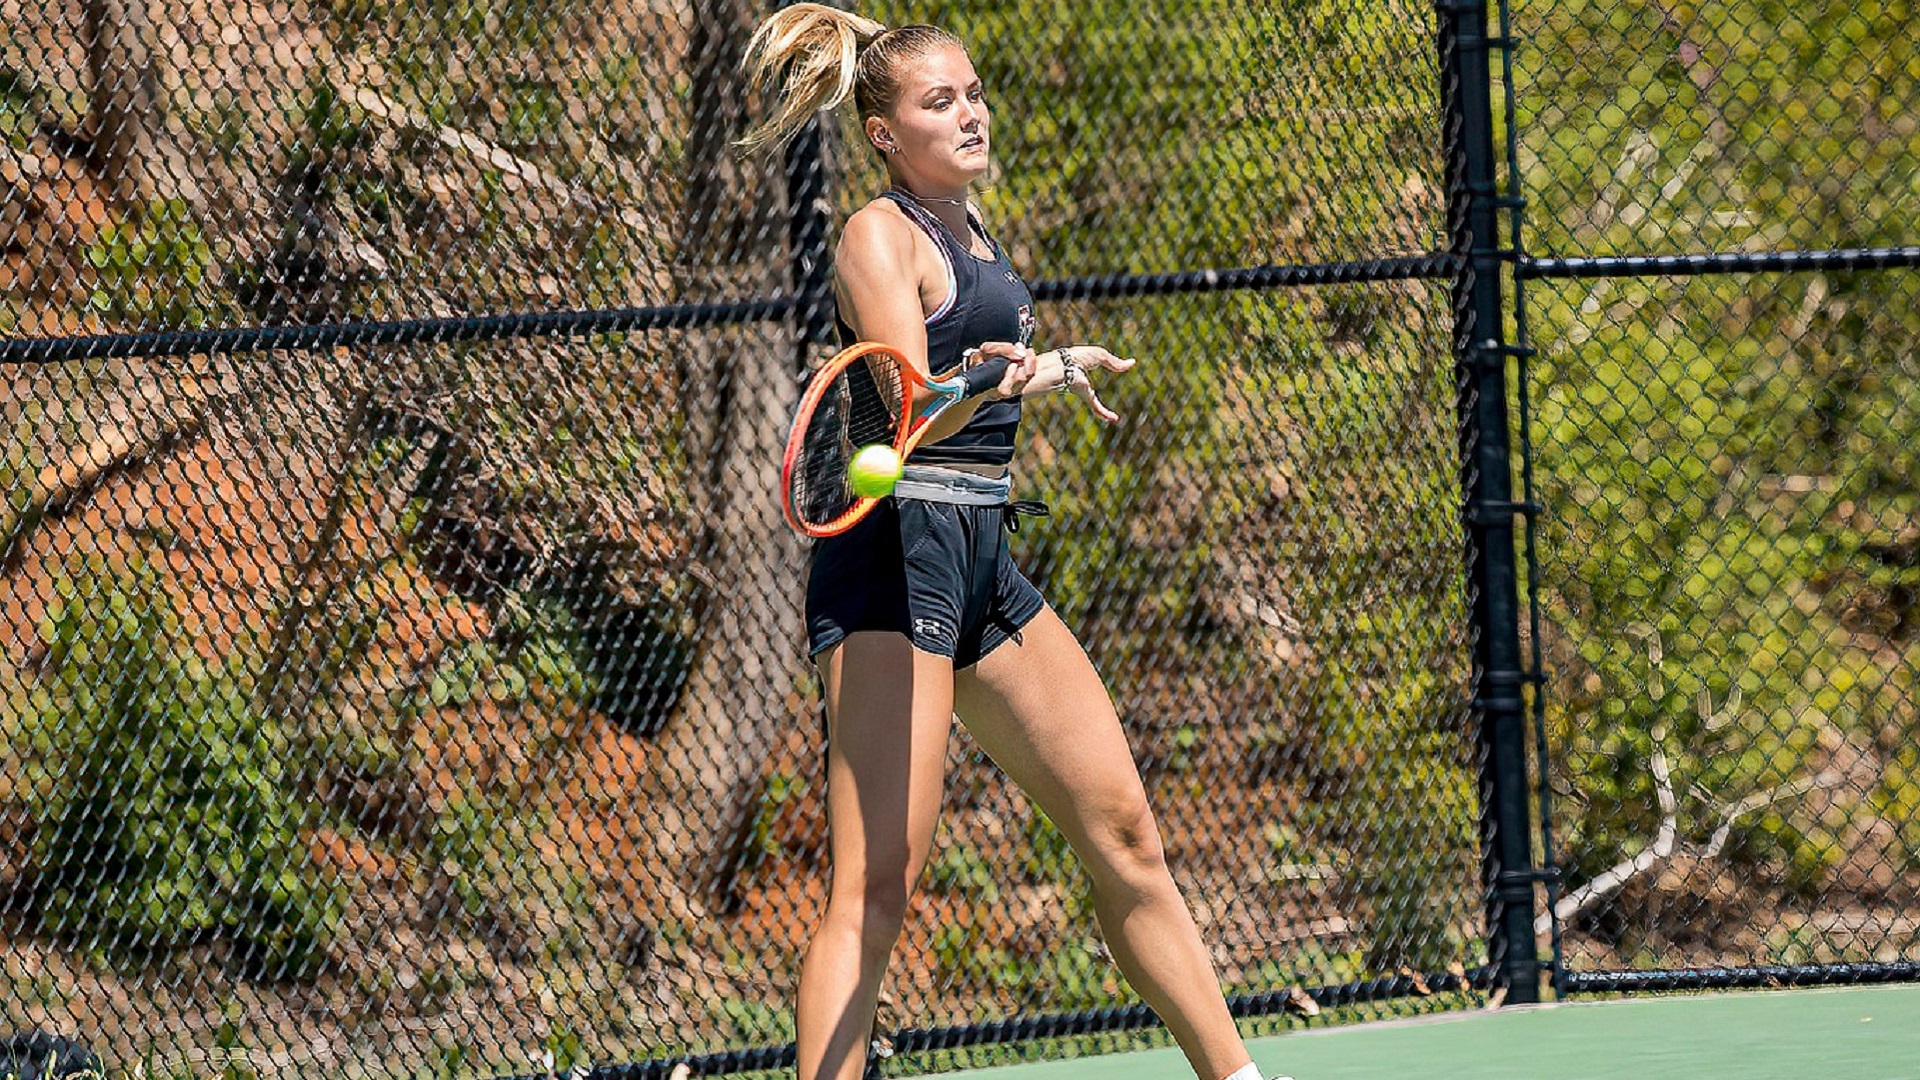 Leonie Floeth rallied from a set down to earn the clinching point against Wingate (photo by Chuck Williams)